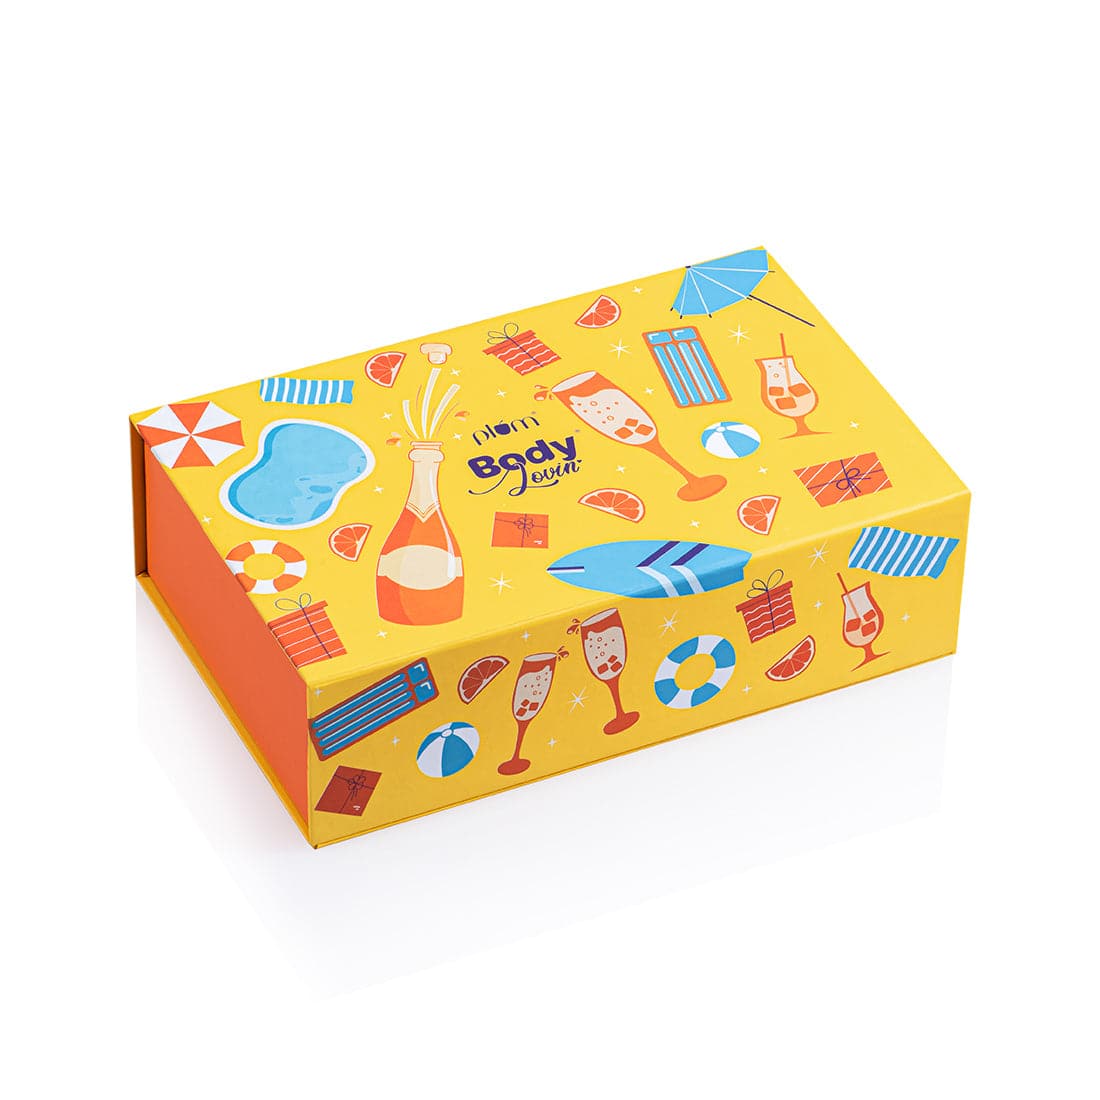 Cardboard Gift Box: An Eco-Friendly and Practical Solution